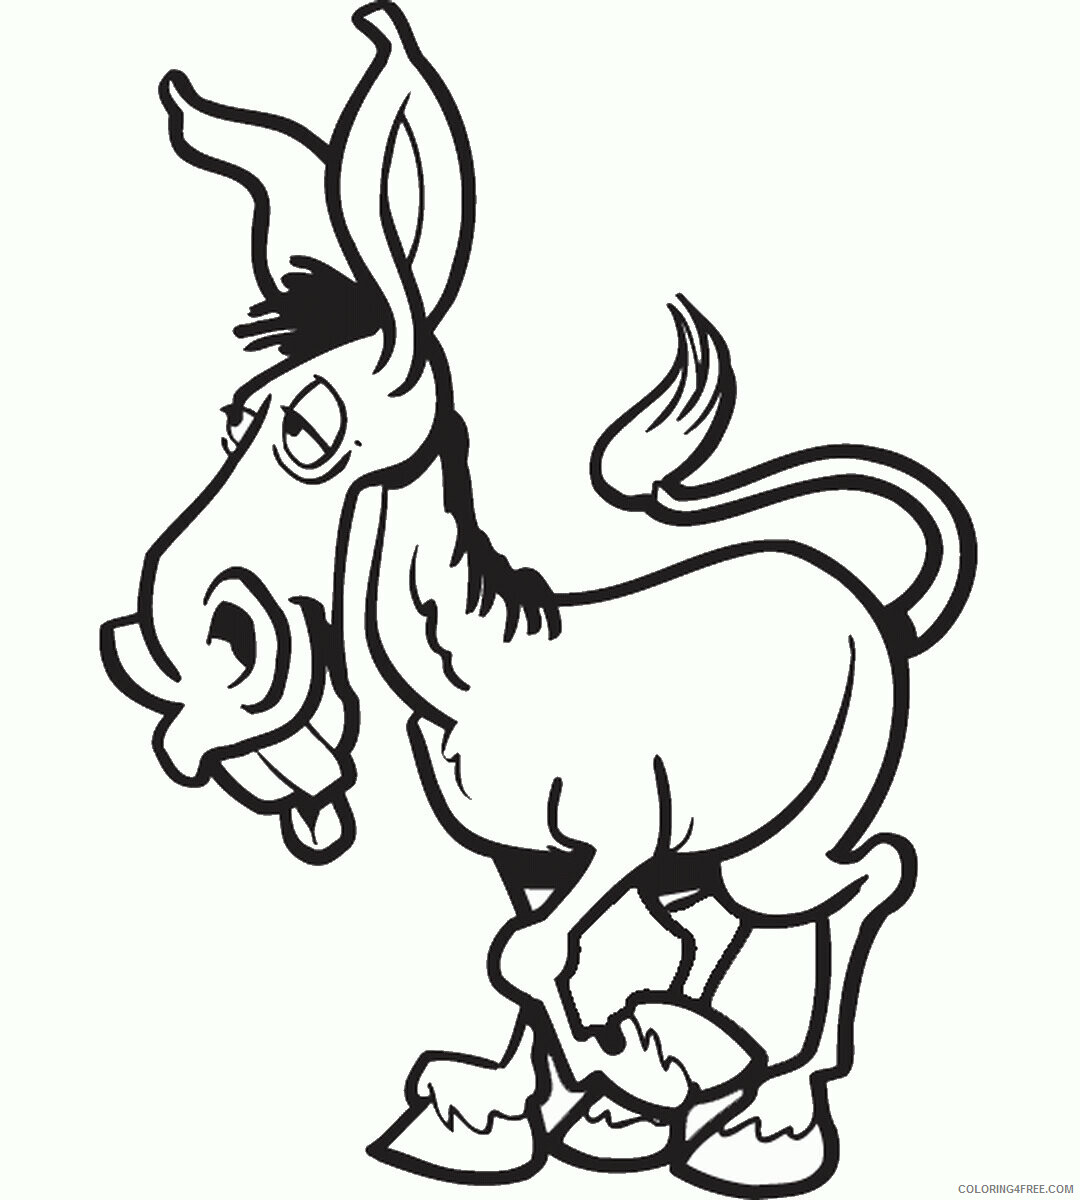 Donkey Coloring Pages Animal Printable Sheets donkey_cl_10 2021 1675 Coloring4free